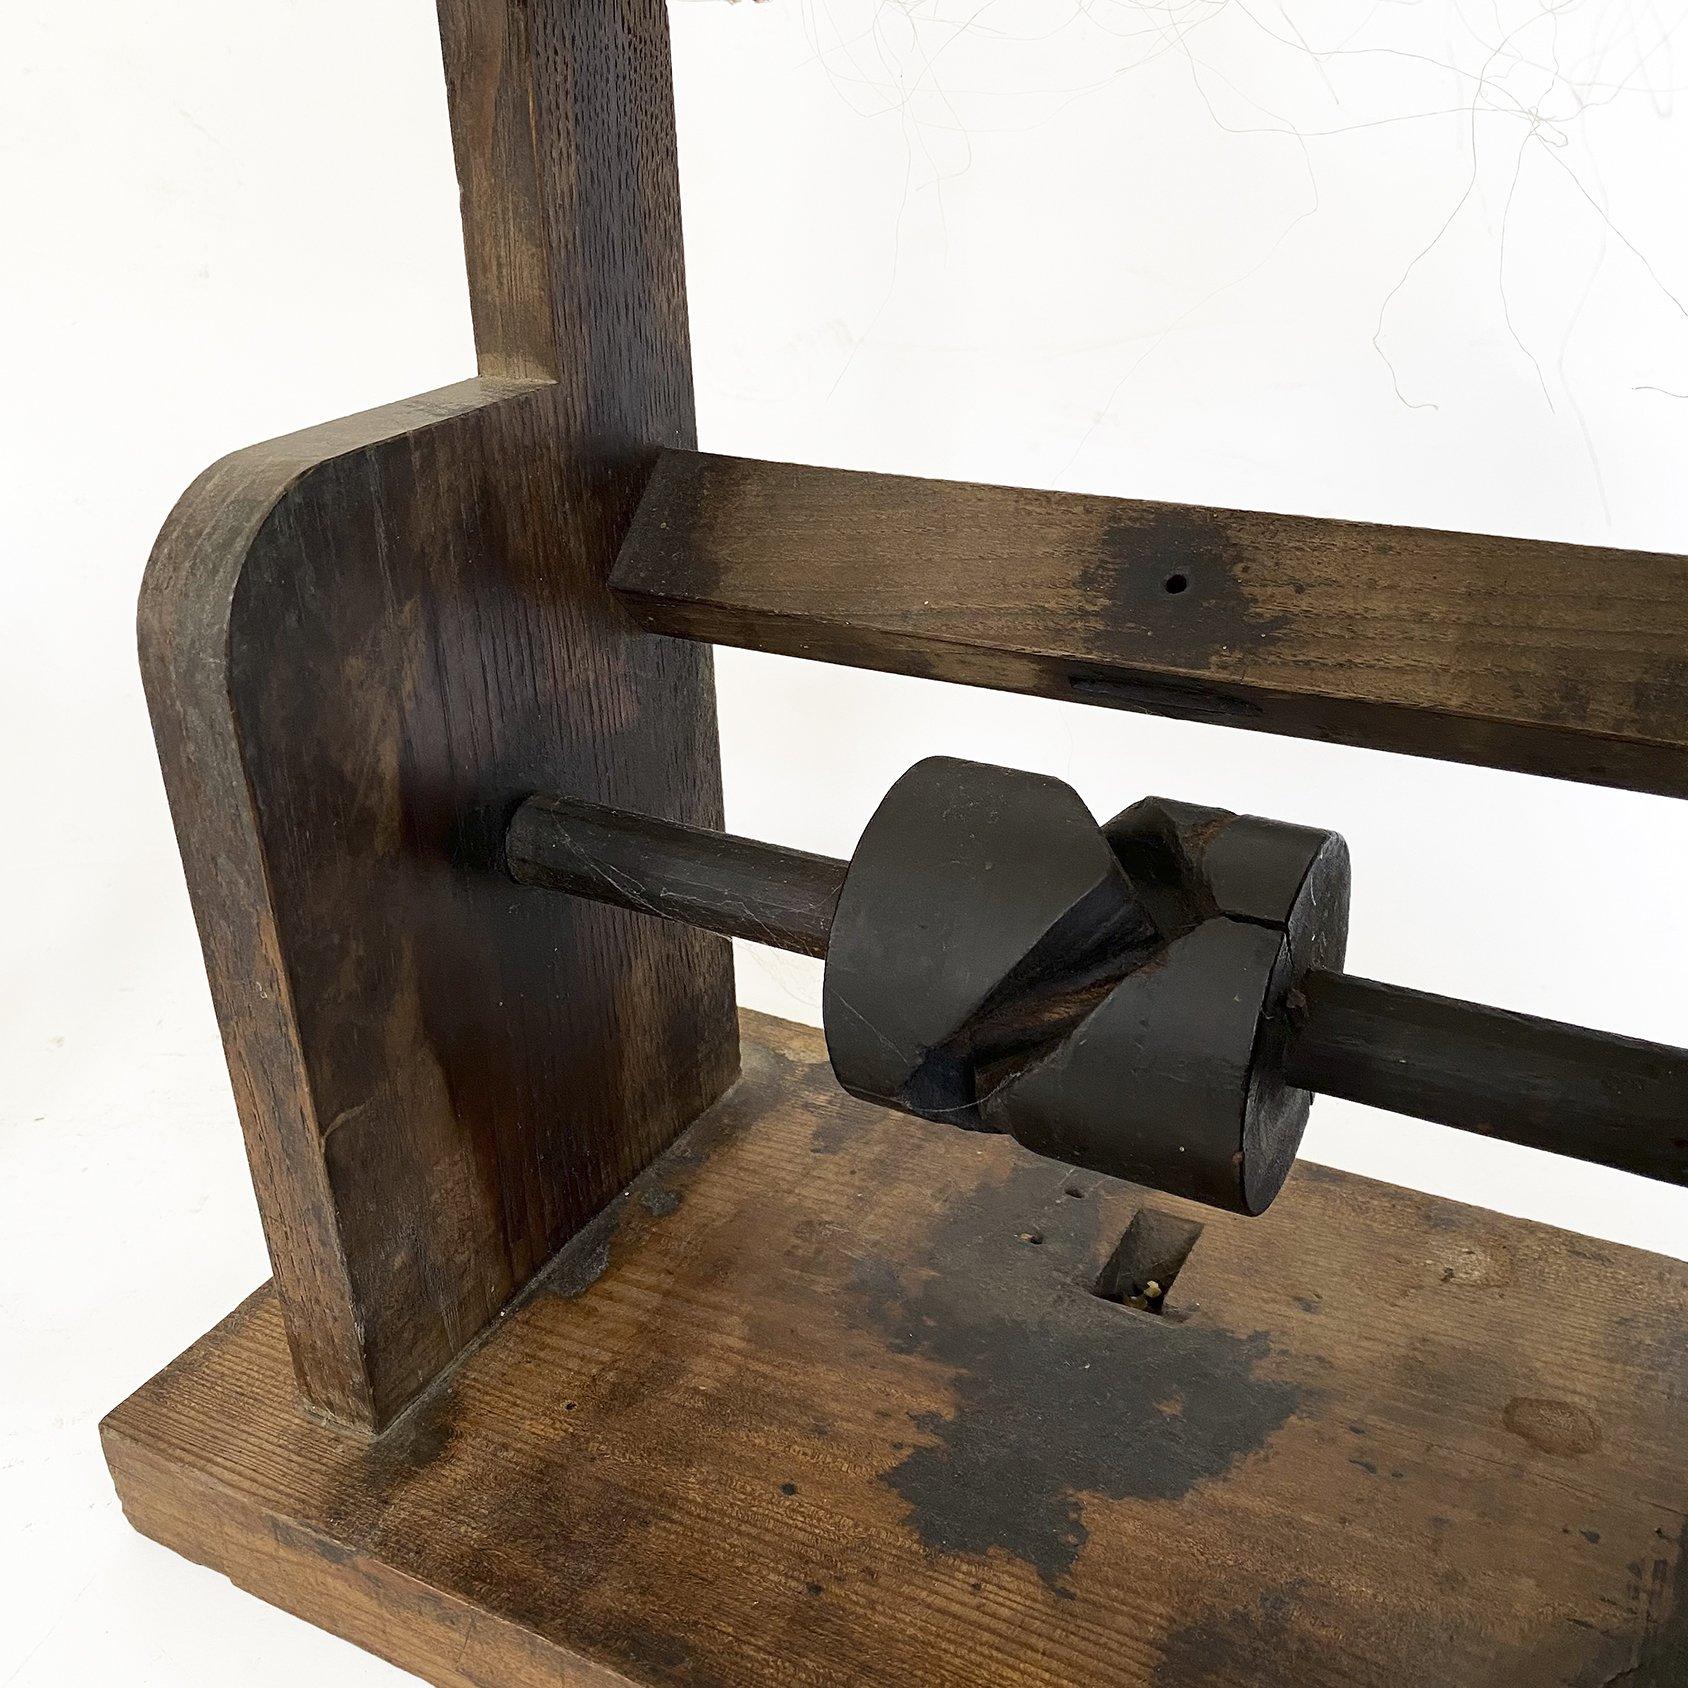 Japanese silk thread wood winder complete with spool and functioning gears. The spool still has the silk thread and an extra spool with different color thread comes with it. The three wooden gears work smoothly when cranked. Several kanji found in